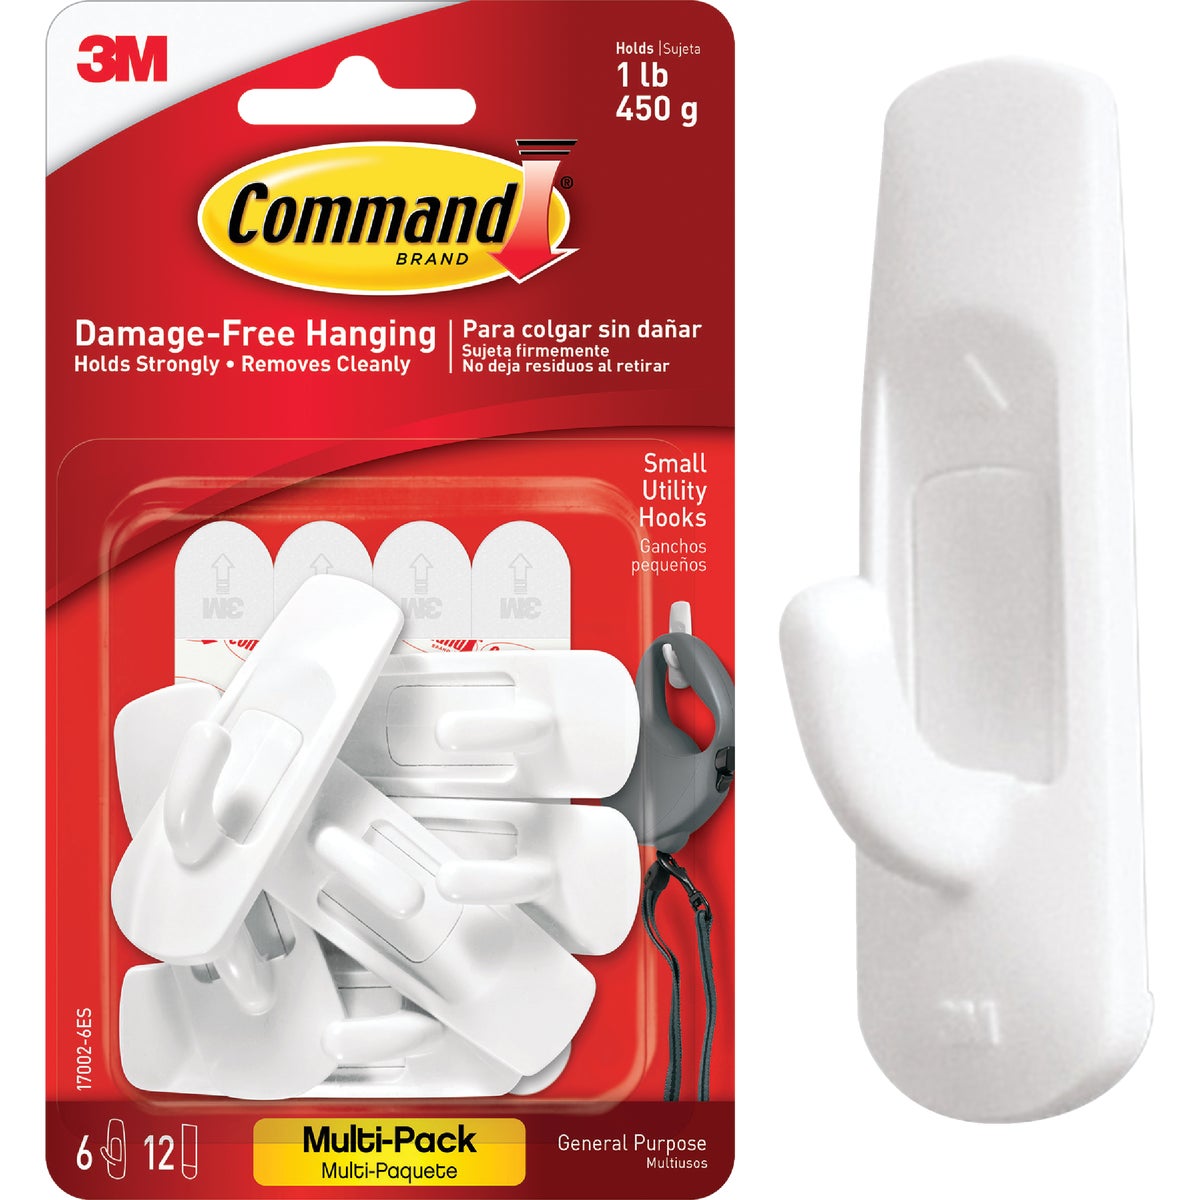 3M Command Small Utility Adhesive Hook (6-Pack)